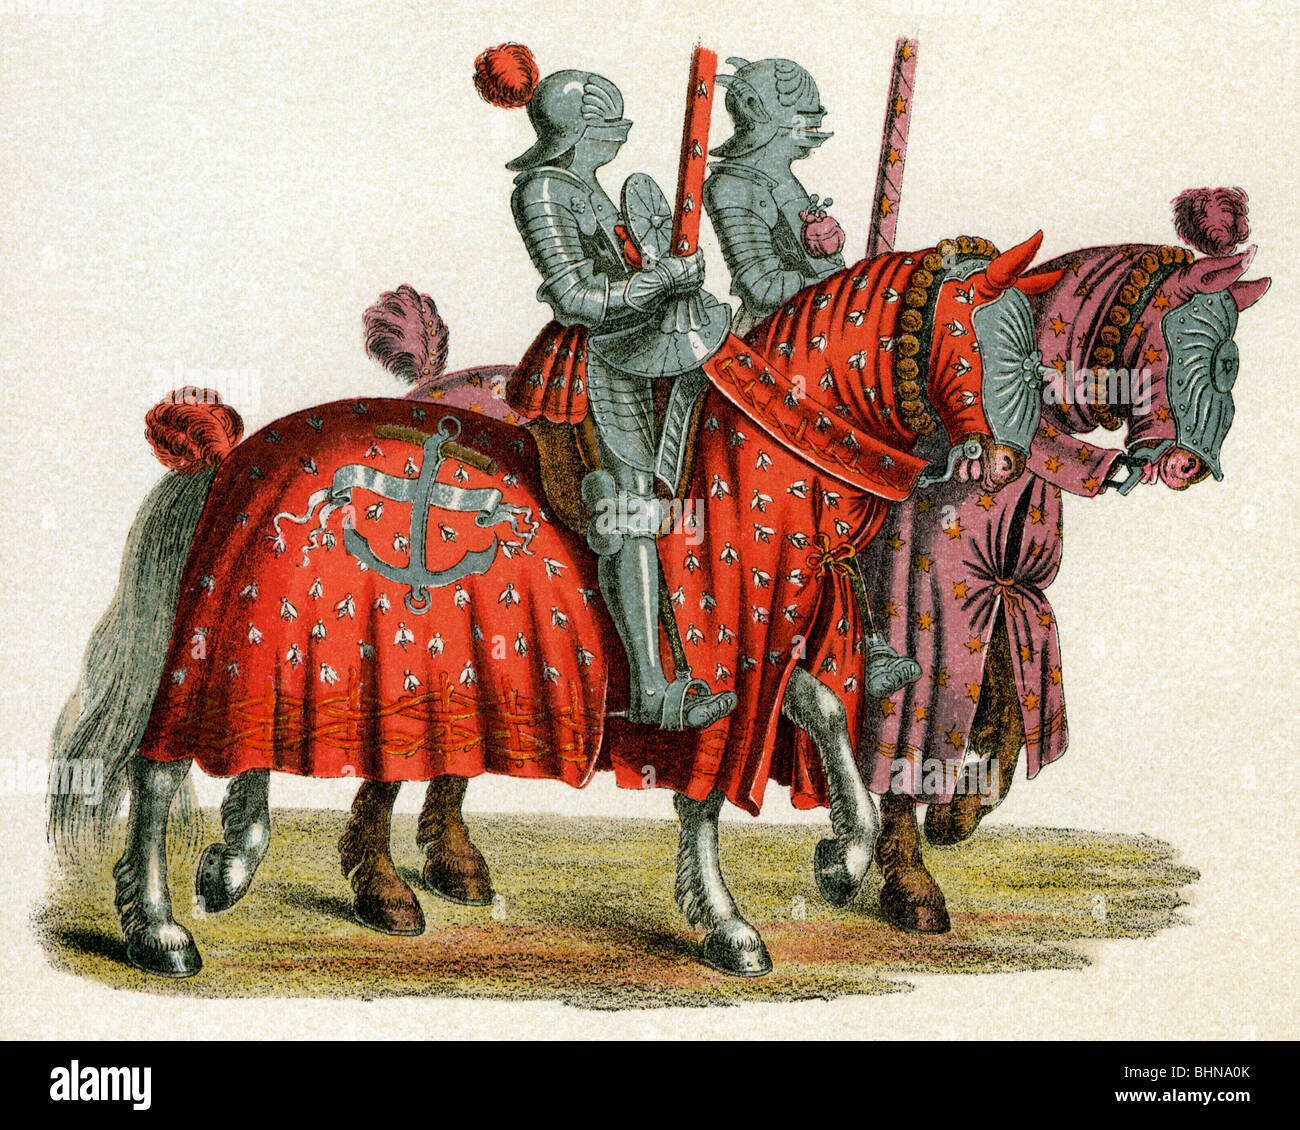 middle ages, knights, riding to tournament, coloured lithograph after woodcuts by Hans Burgkmair to "Freydal" by emperor Maximilian I, circa 1513, Stock Photo